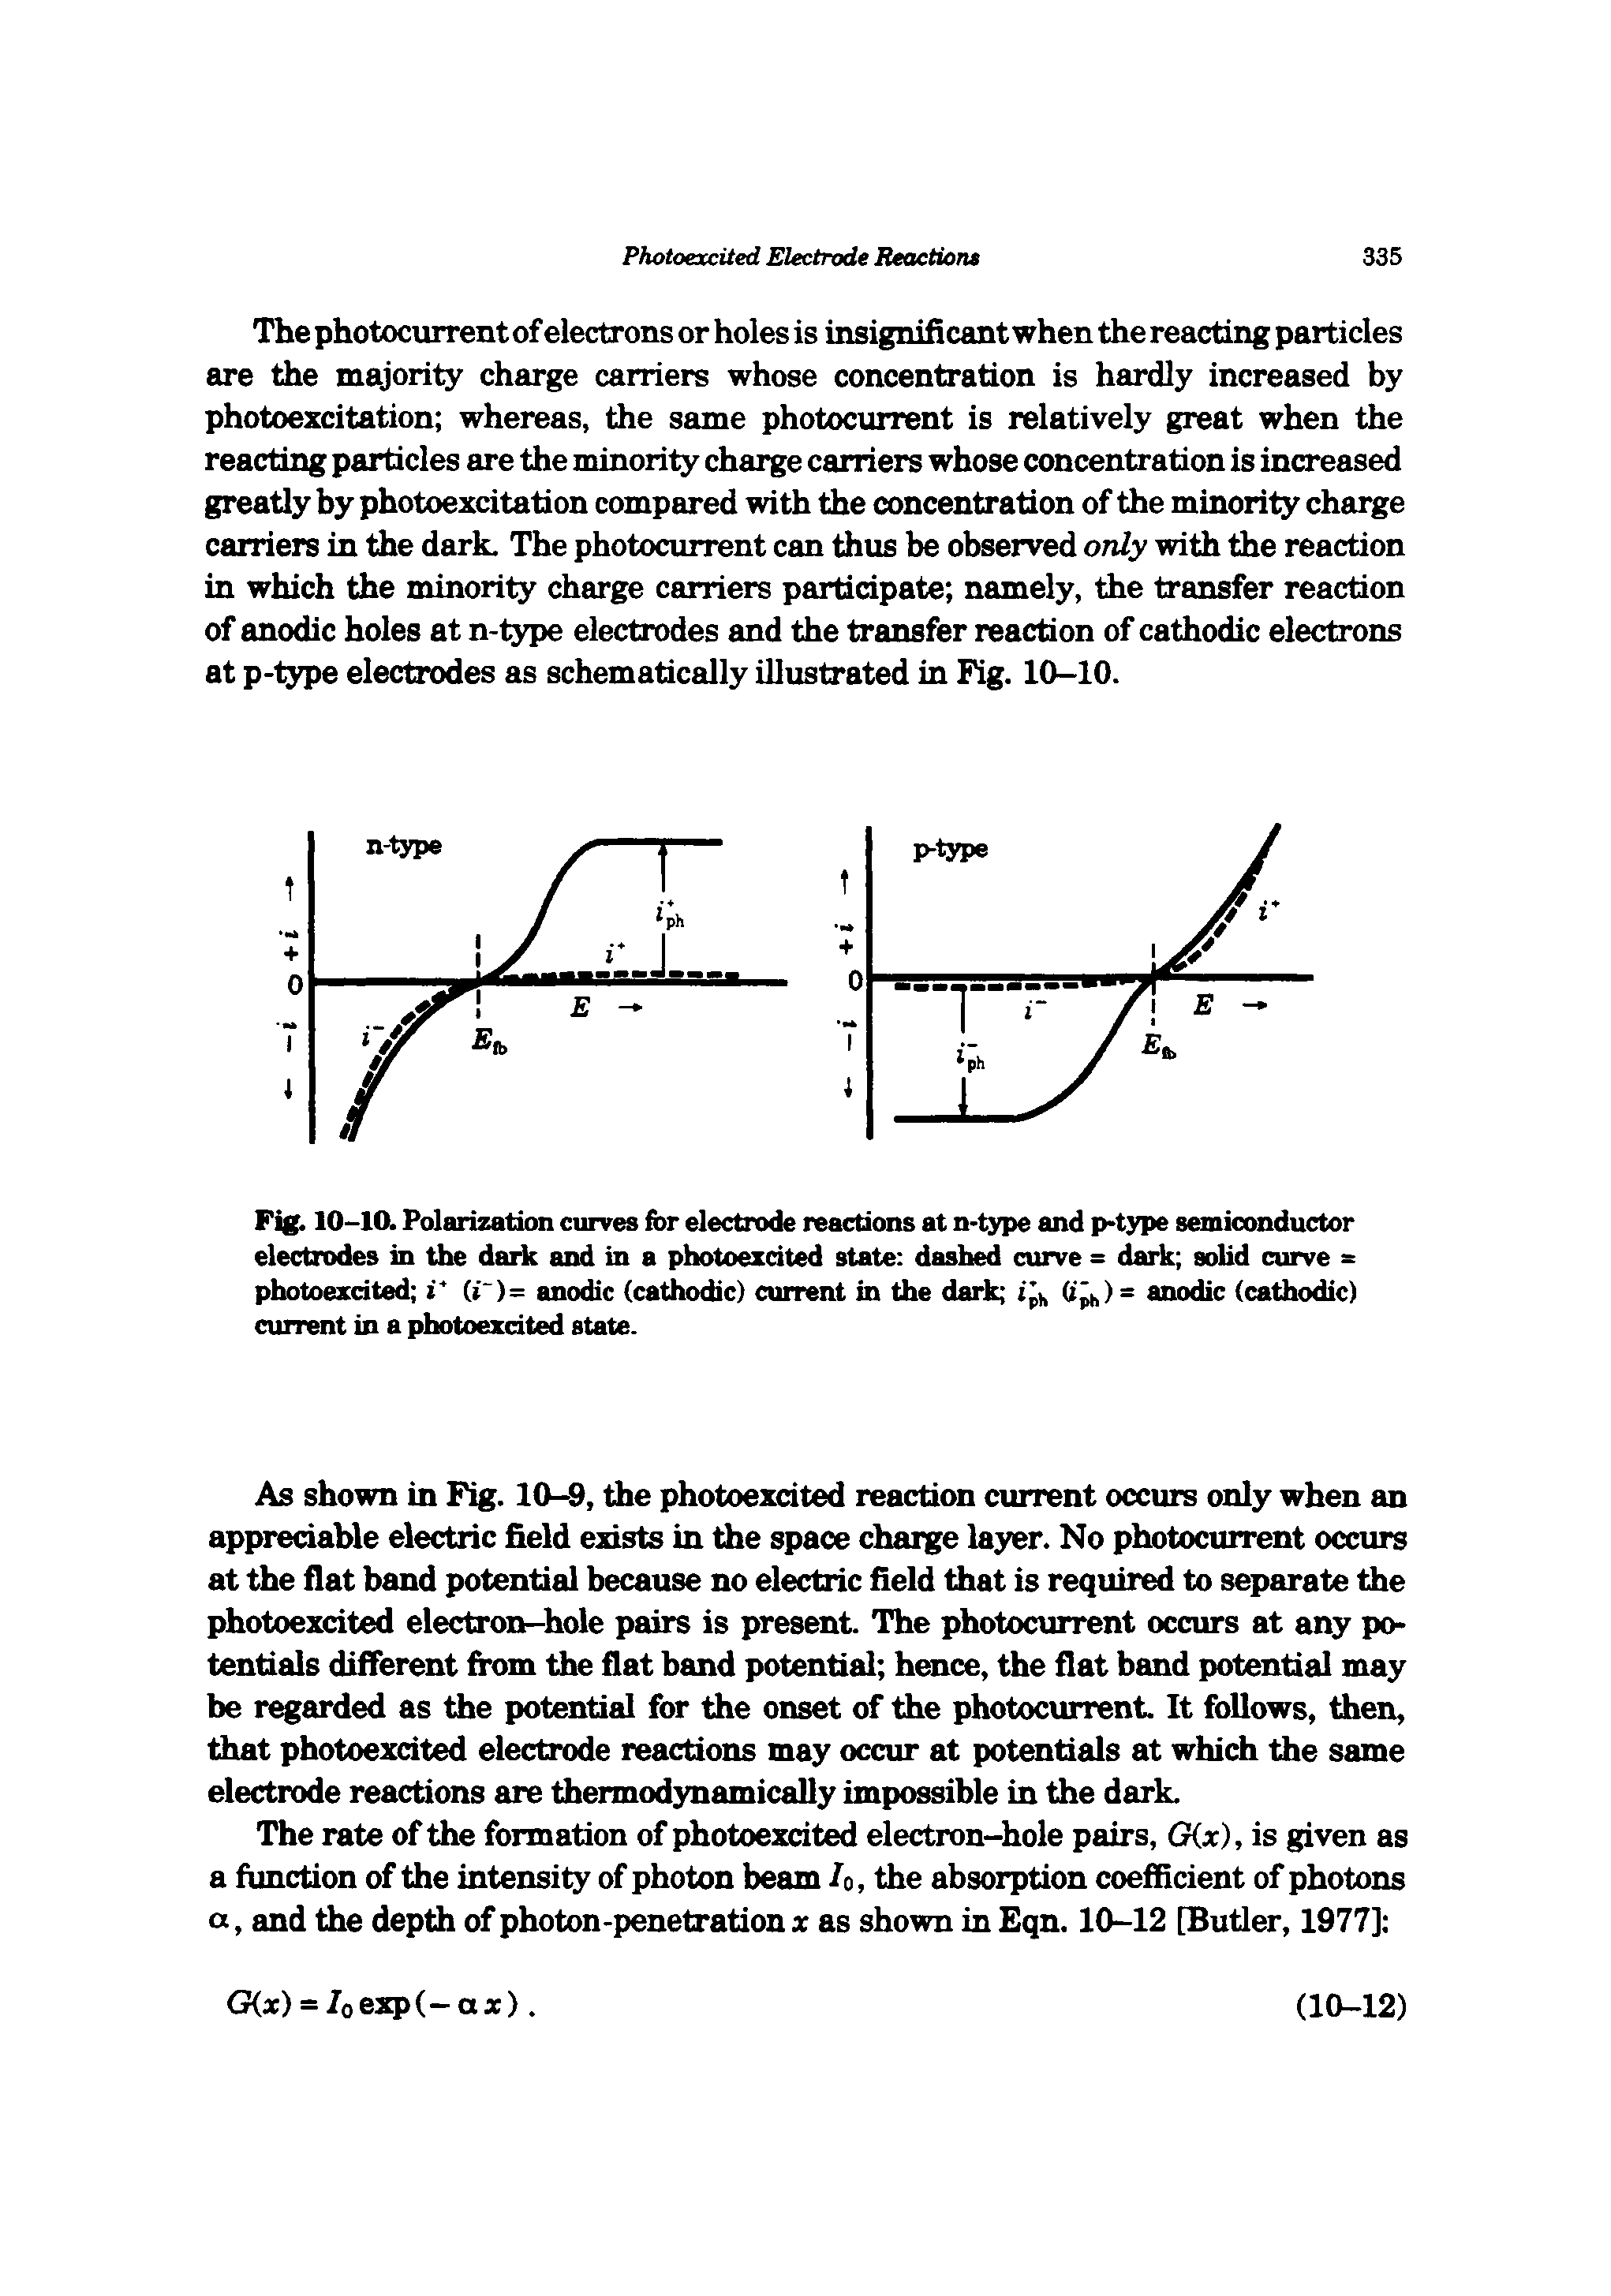 Fig. 10-10. Polarization curves for electrode reactions at n-type and p type semiconductor electrodes in the dark and in a photoezdted state dashed curve = dark solid curve = photoexcited V (i )= anodic (cathodic) current in the dark tpi, (t ) = anodic (cathodic) current in a photoexcited state.